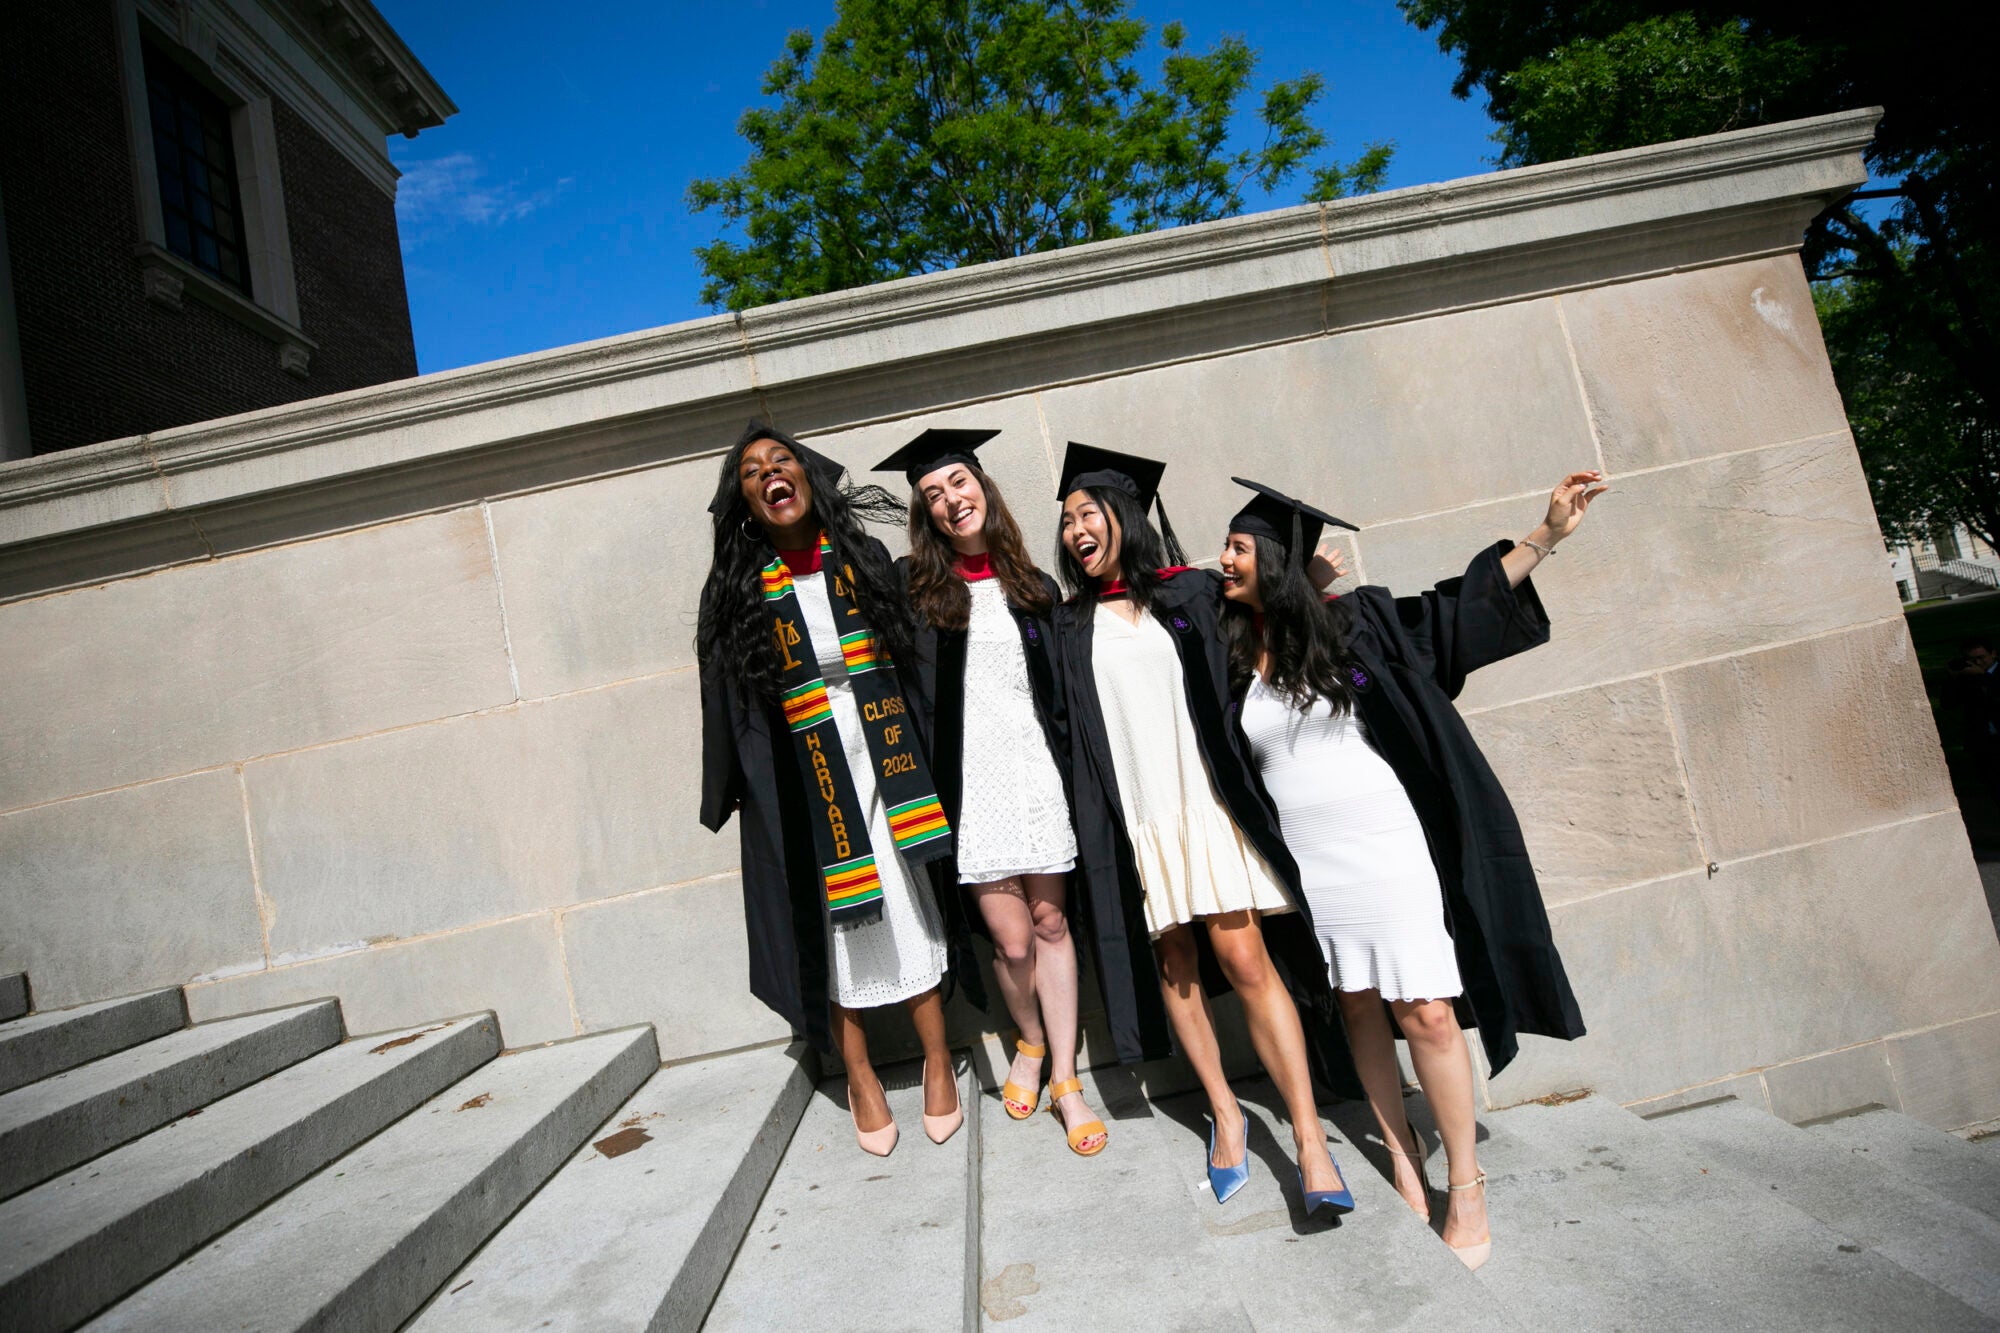 Four students in caps and gowns stand together for a photo on stone steps